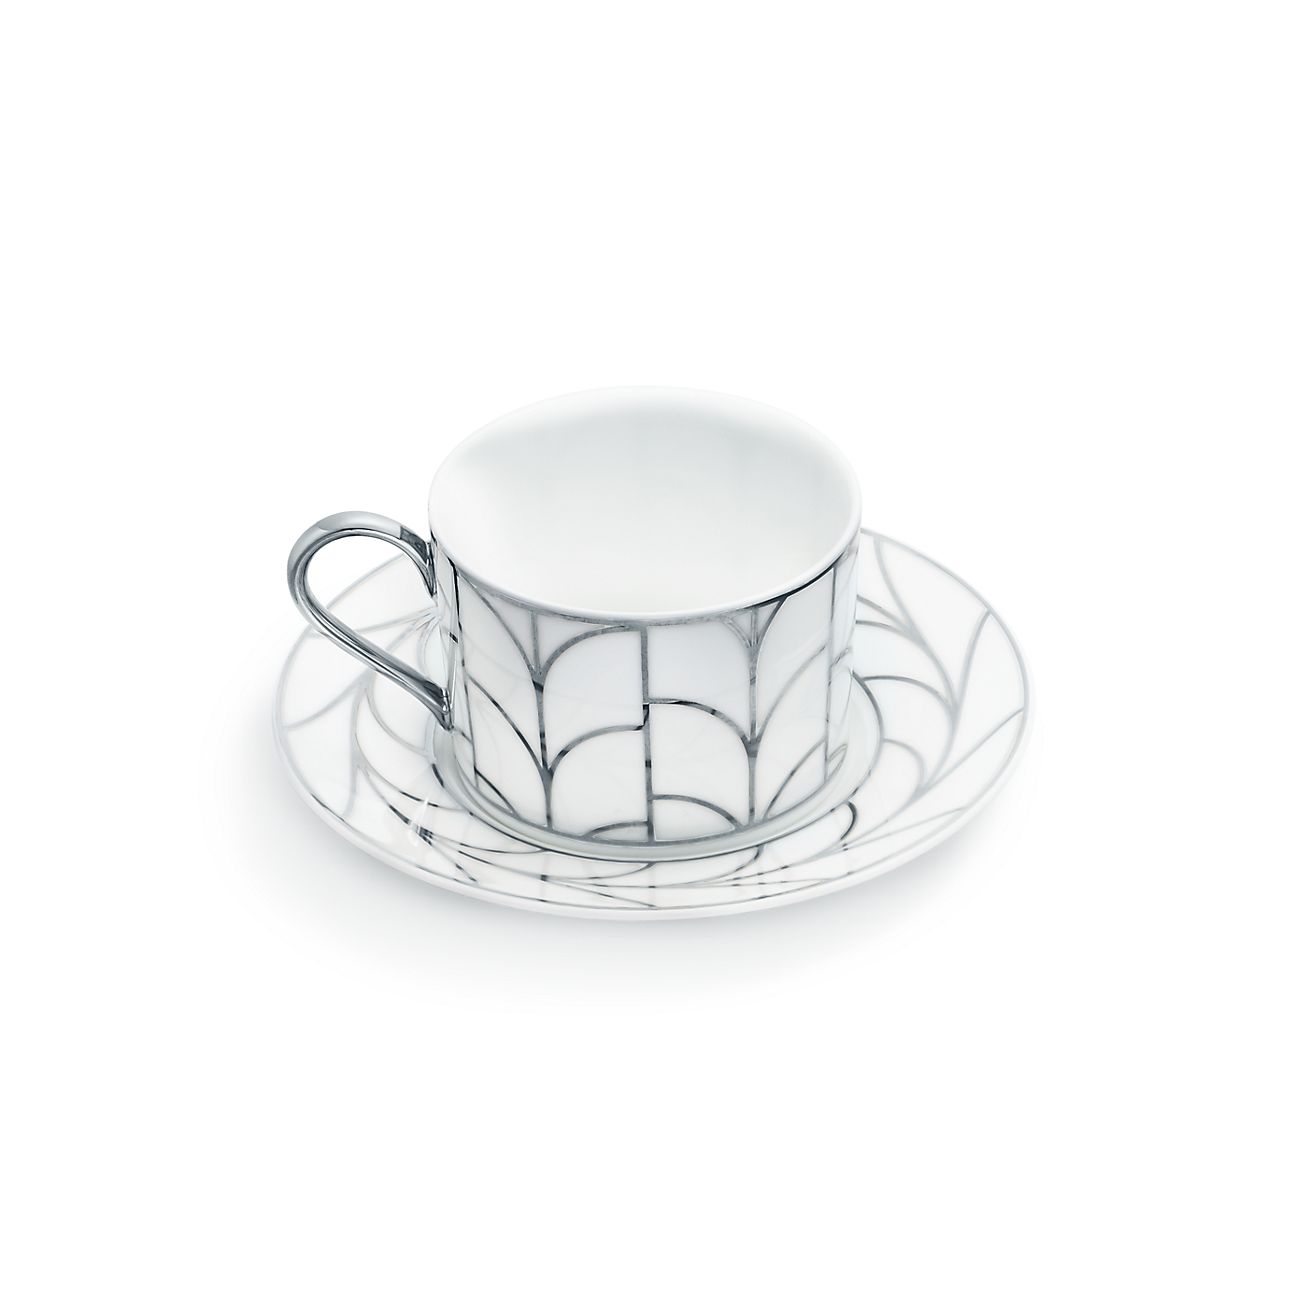 tiffany tea cup and saucer